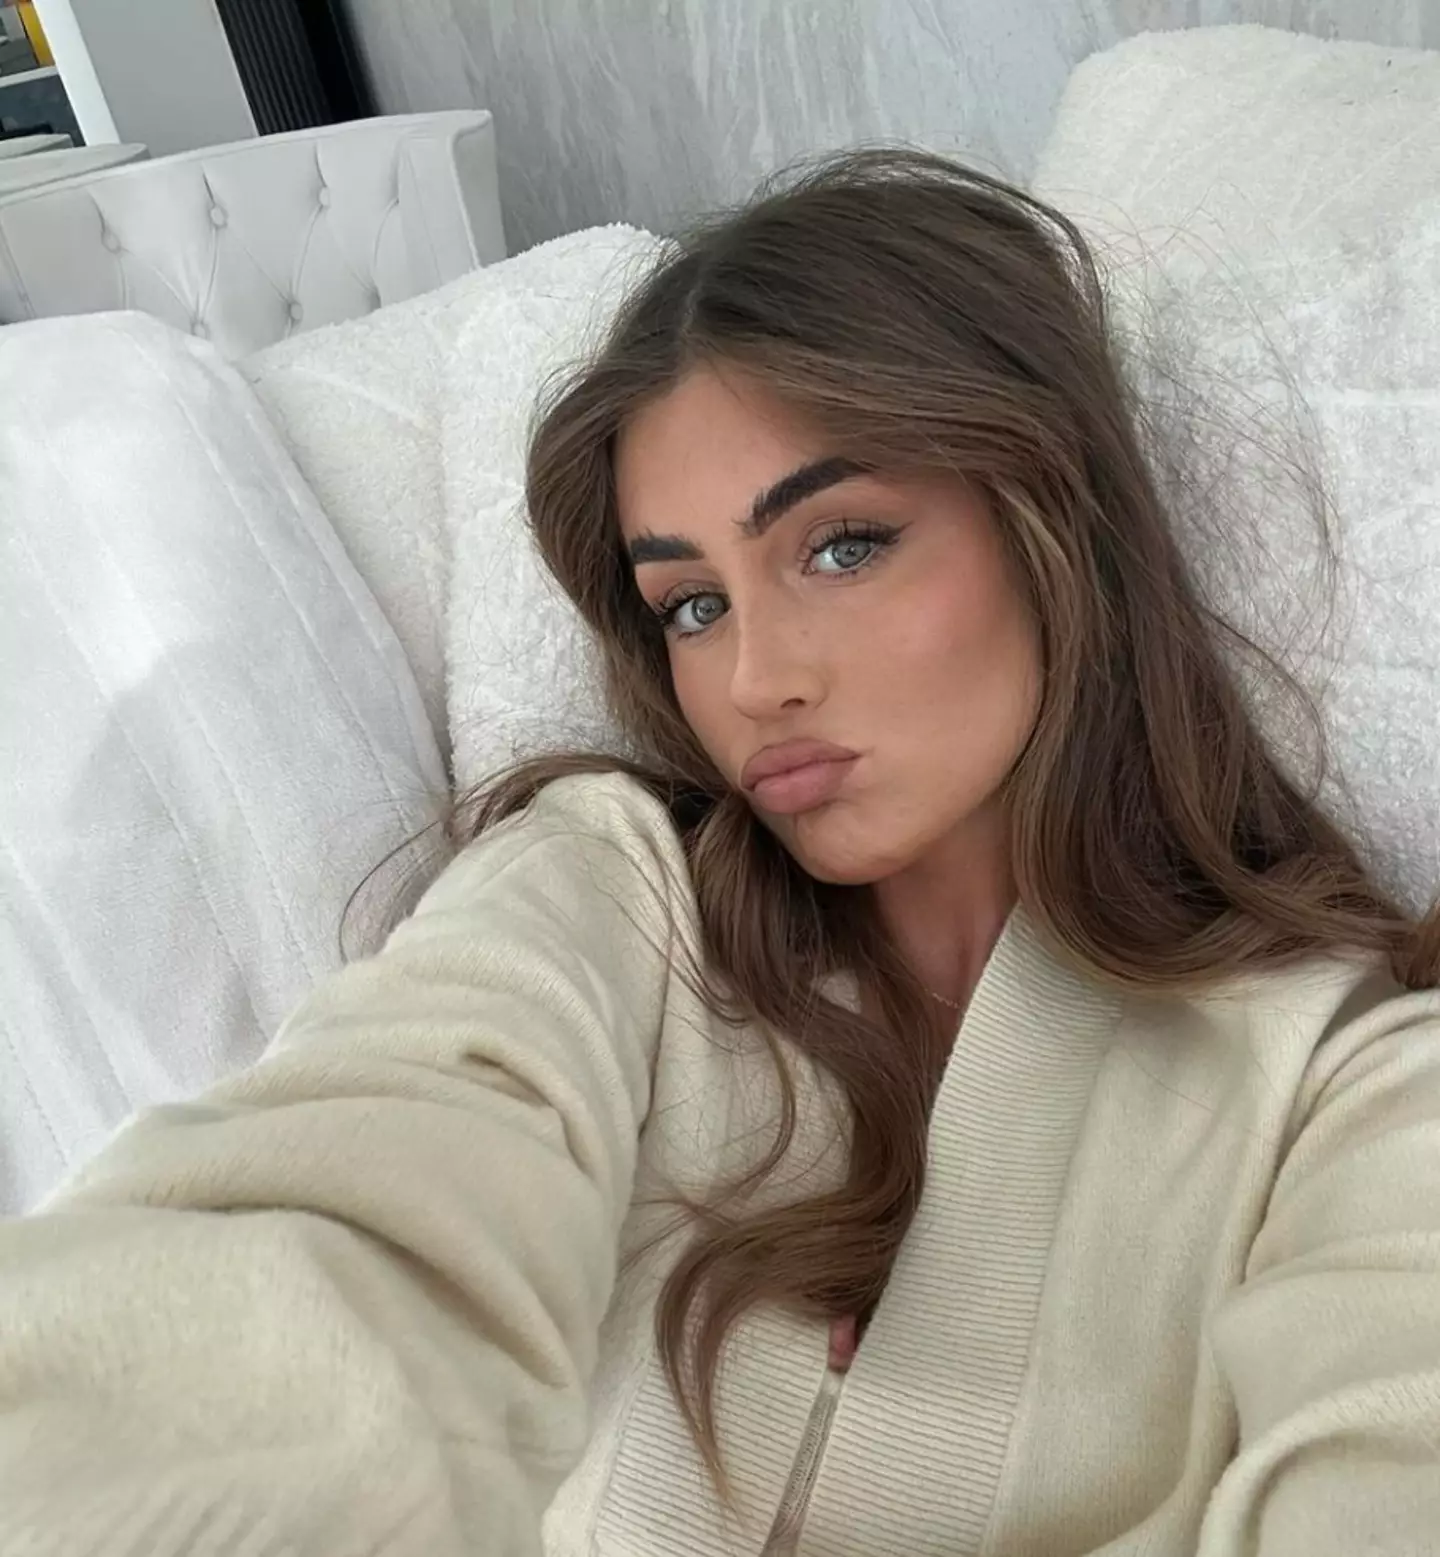 Georgia Steel has opened up about the 'awful' messages she received following Love Island: All Stars. (Instagram/@geesteelx)